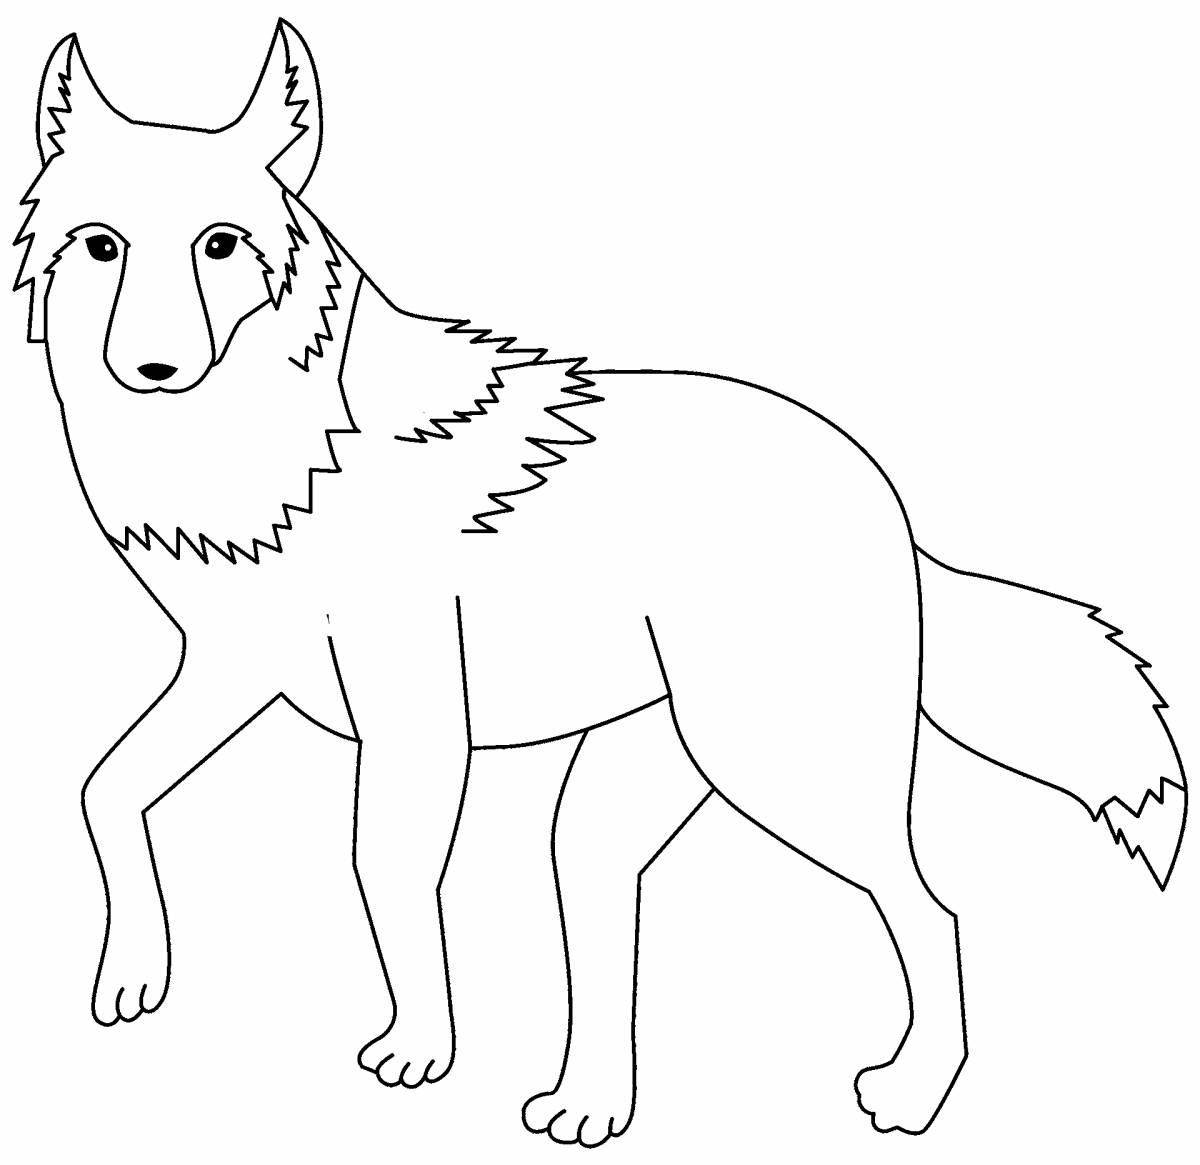 Coloring book beckoning coyote